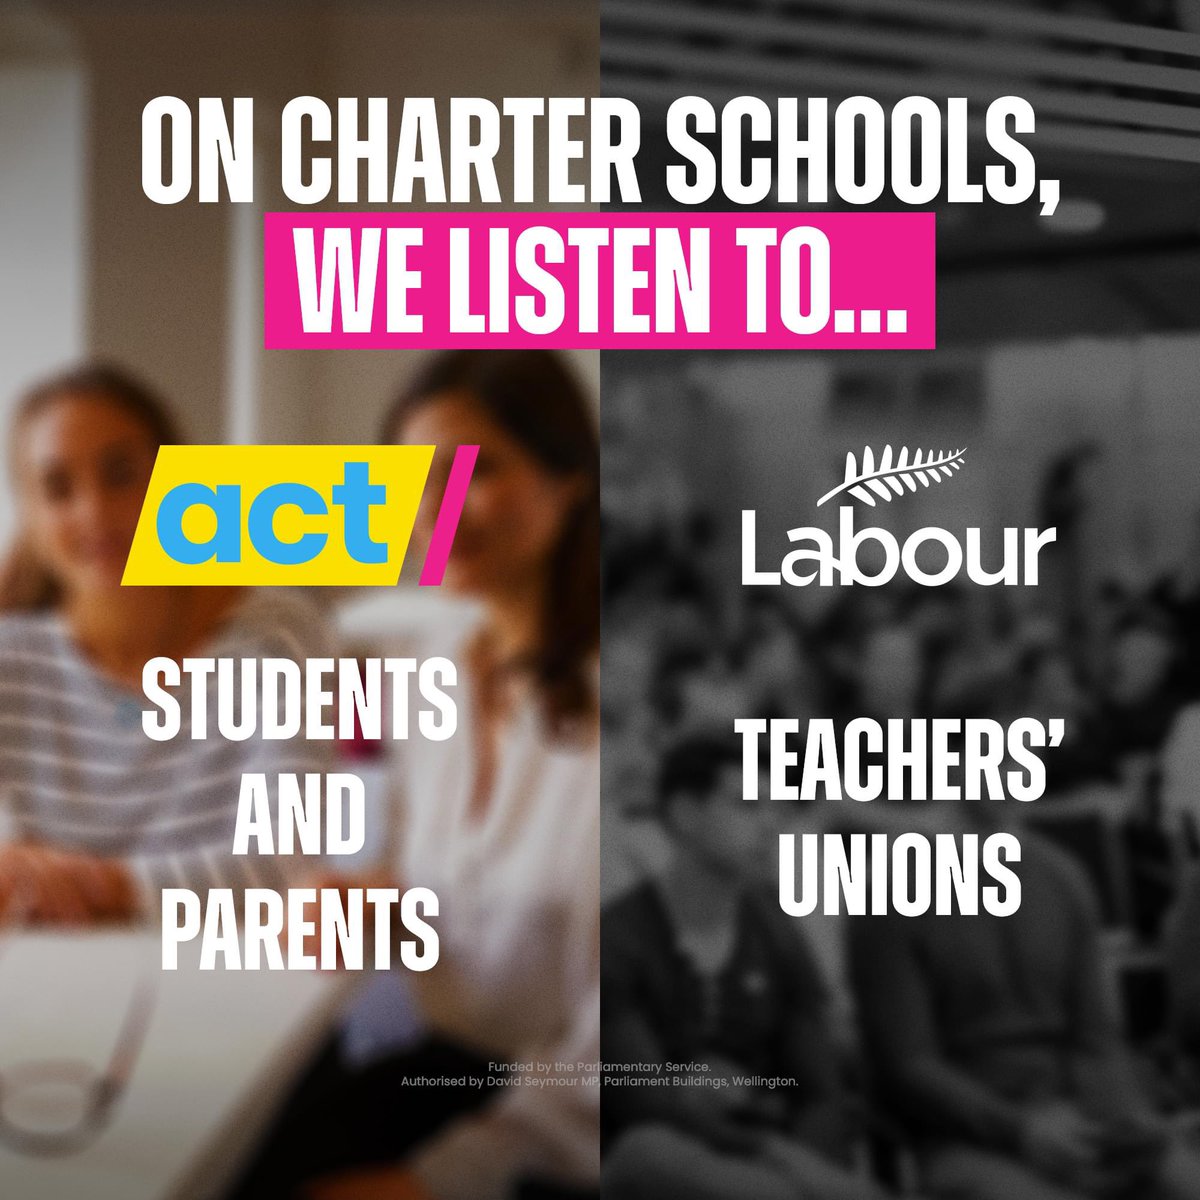 Remember when Jacinda said Labour scrapped charter schools because the teachers' unions told them to?